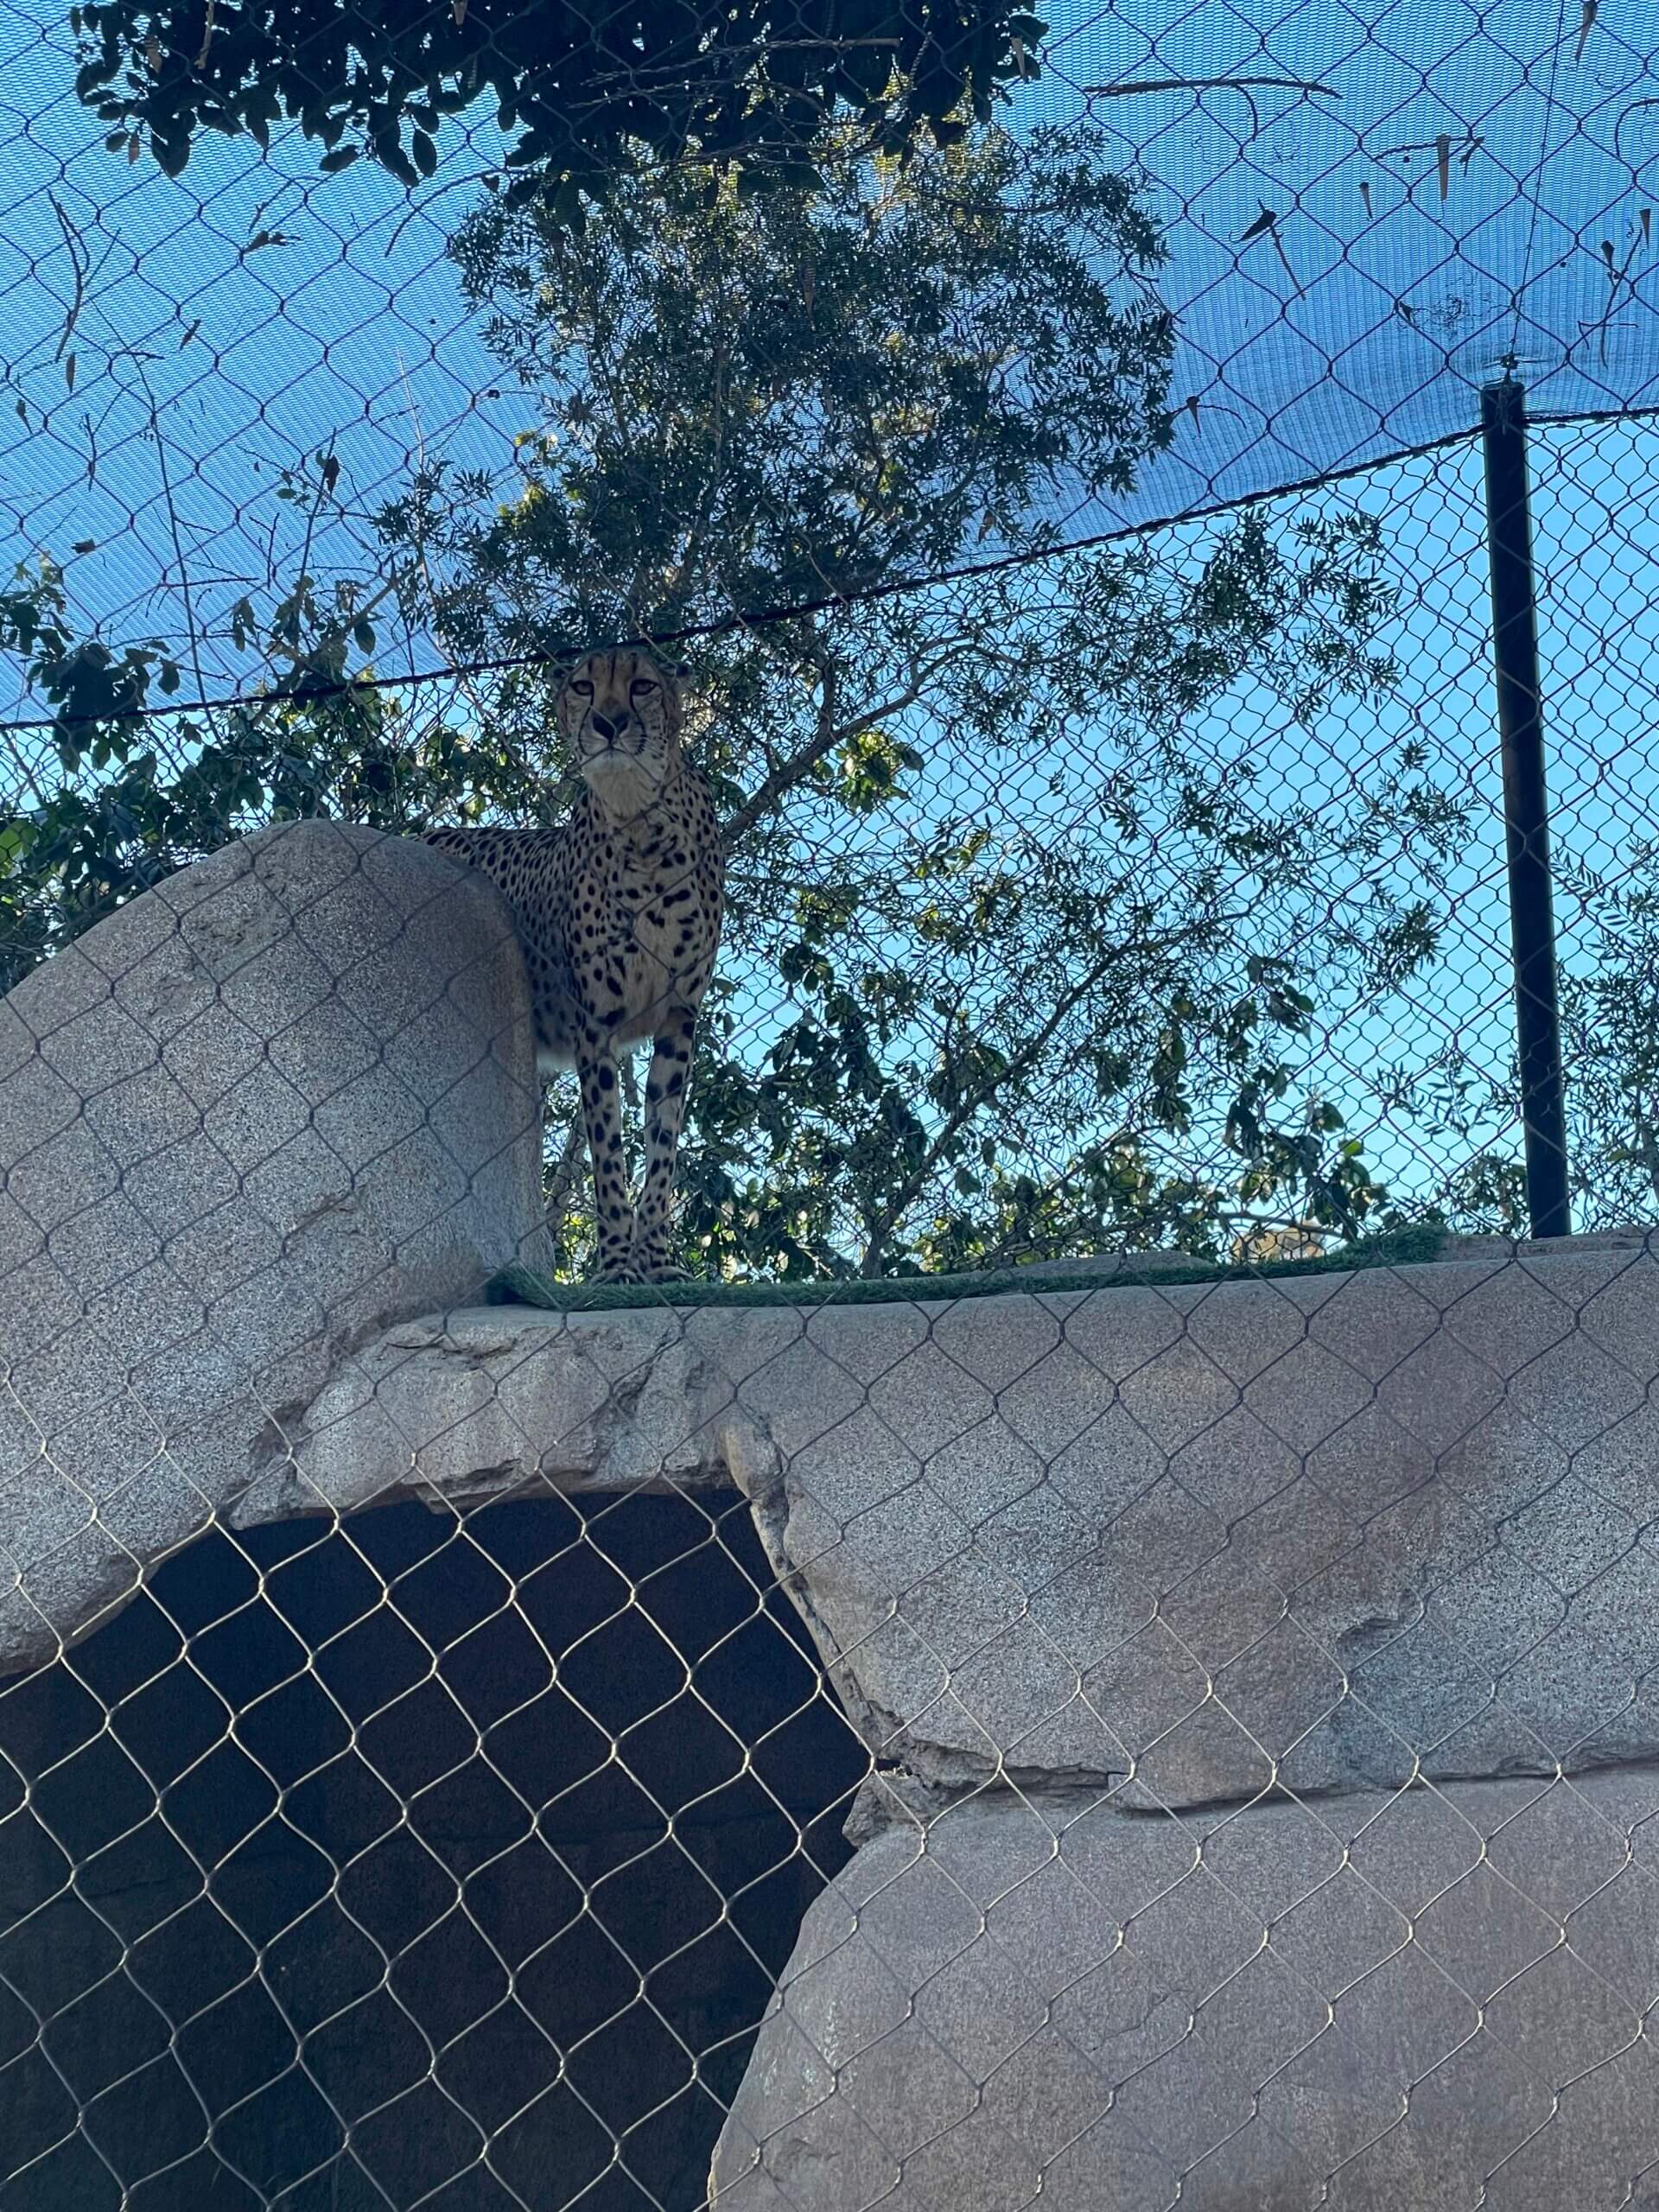 cheetah, San Diego Zoo, zoo, are zoos ethical?, are zoos bad places?, are zoos as bad as seaworld?, mixed feelings about zoos, visiting the san diego zoo, things to do in San Diego, attractions in San Diego